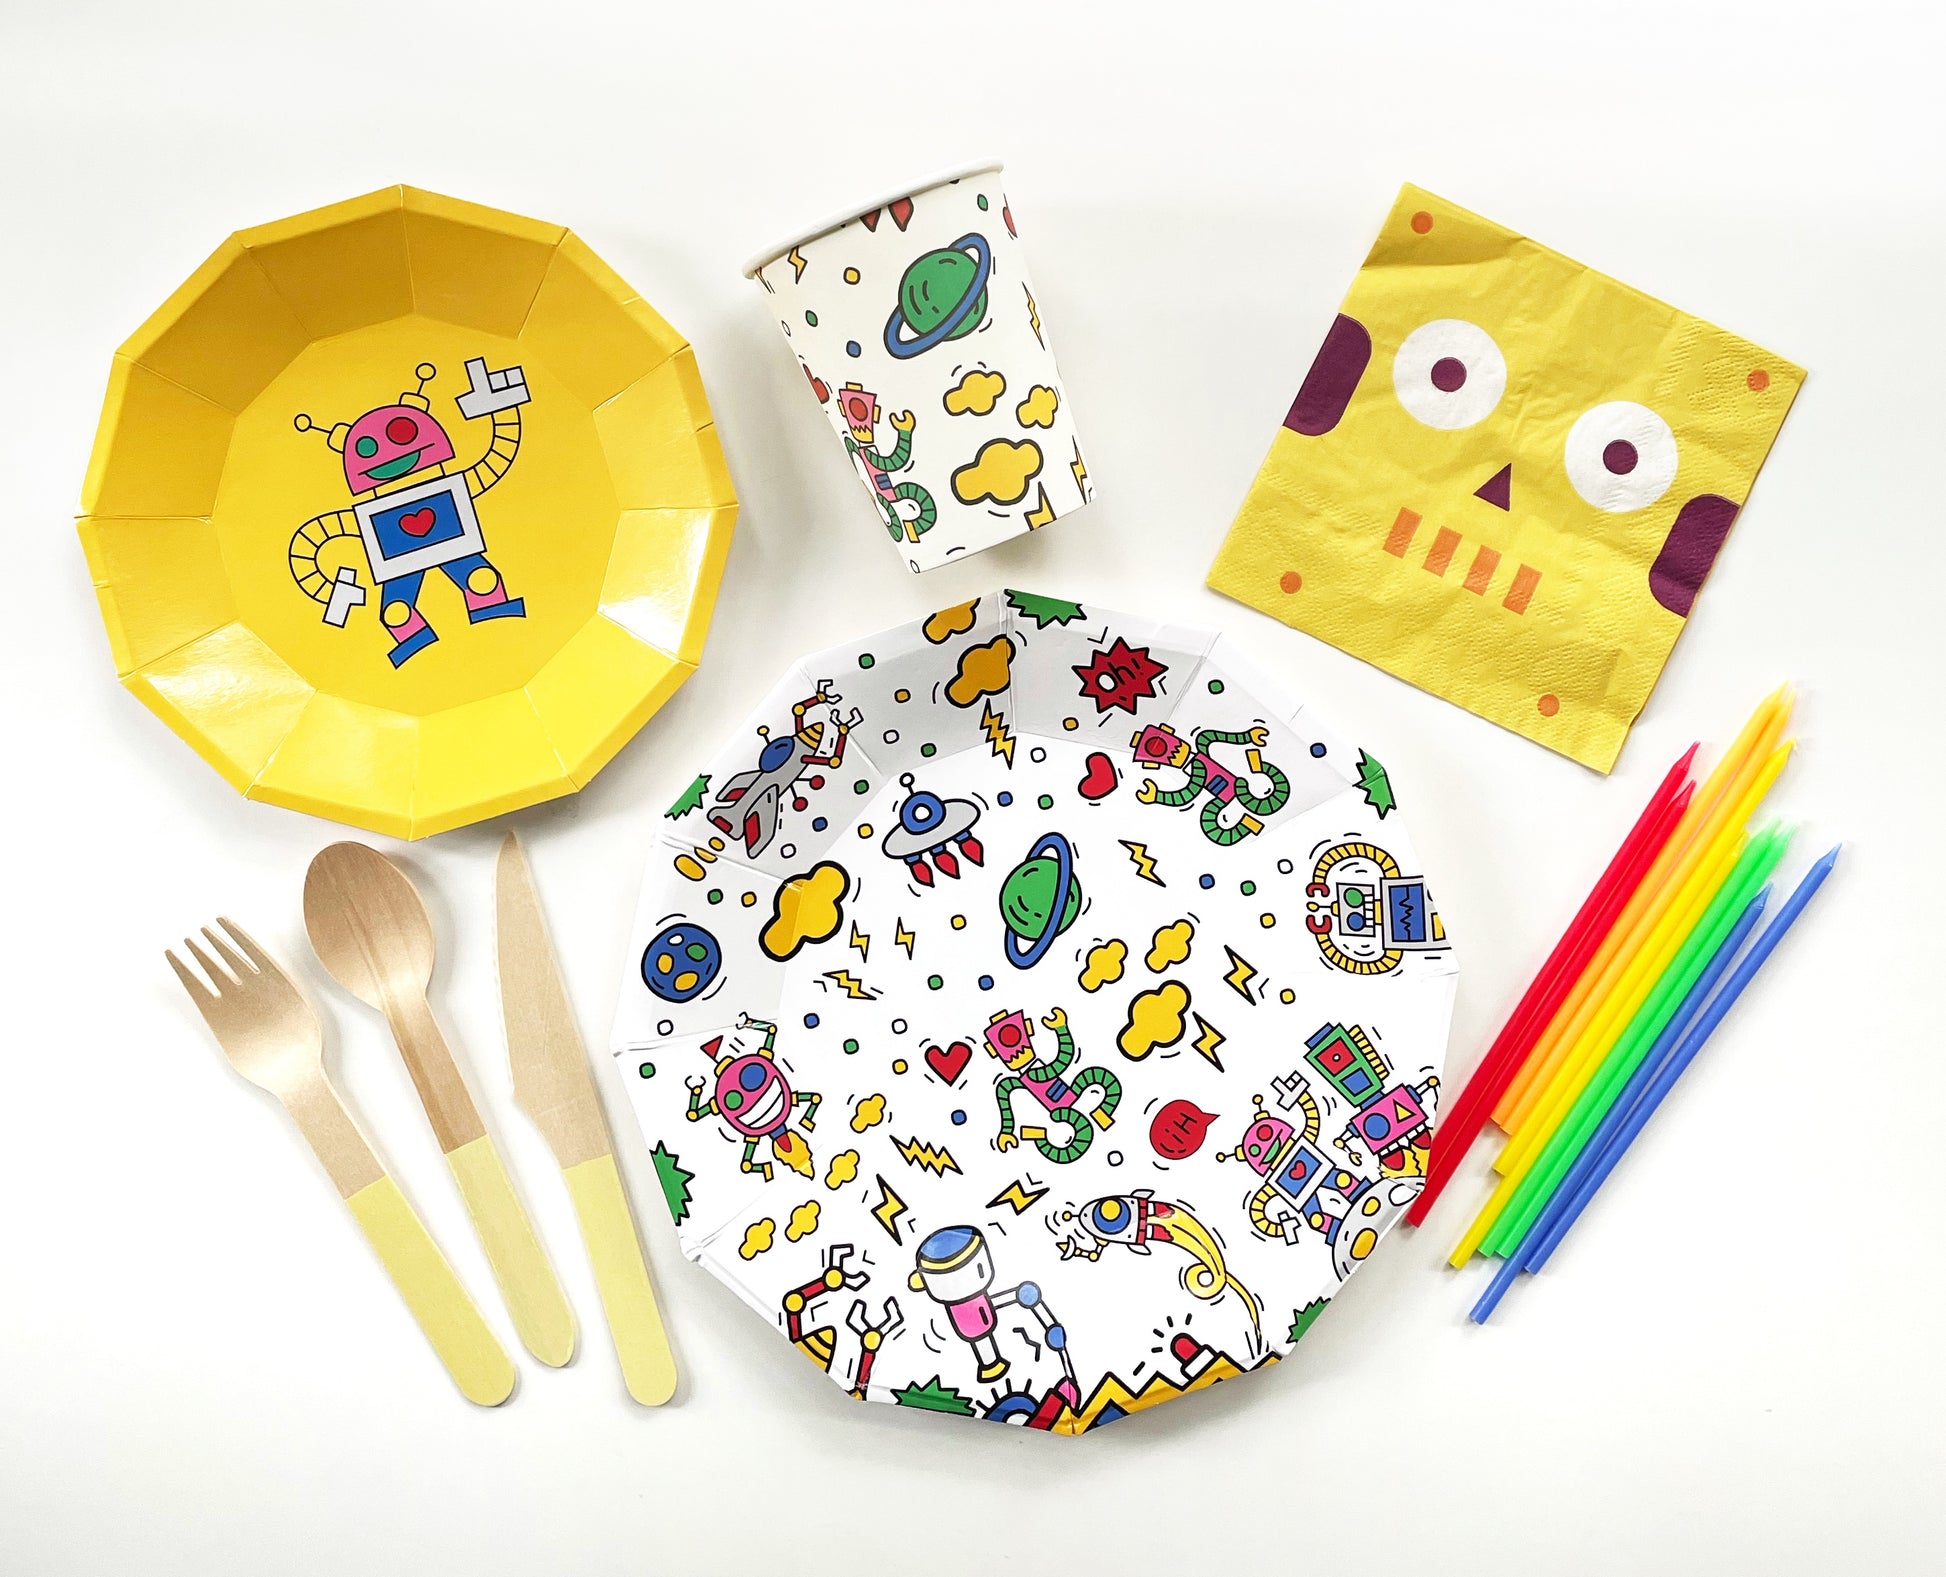 The complete Robot Party Kit including large paper party plates, small yellow paper party plates, paper cups, yellow paper napkins, yellow dipped wooden utensils and tall rainbow birthday candles. The robot pattern includes planets, robots, spaceships and clouds in green, blue, red, yellow and pink colours. The party plates are in the shape of a dodecagon.